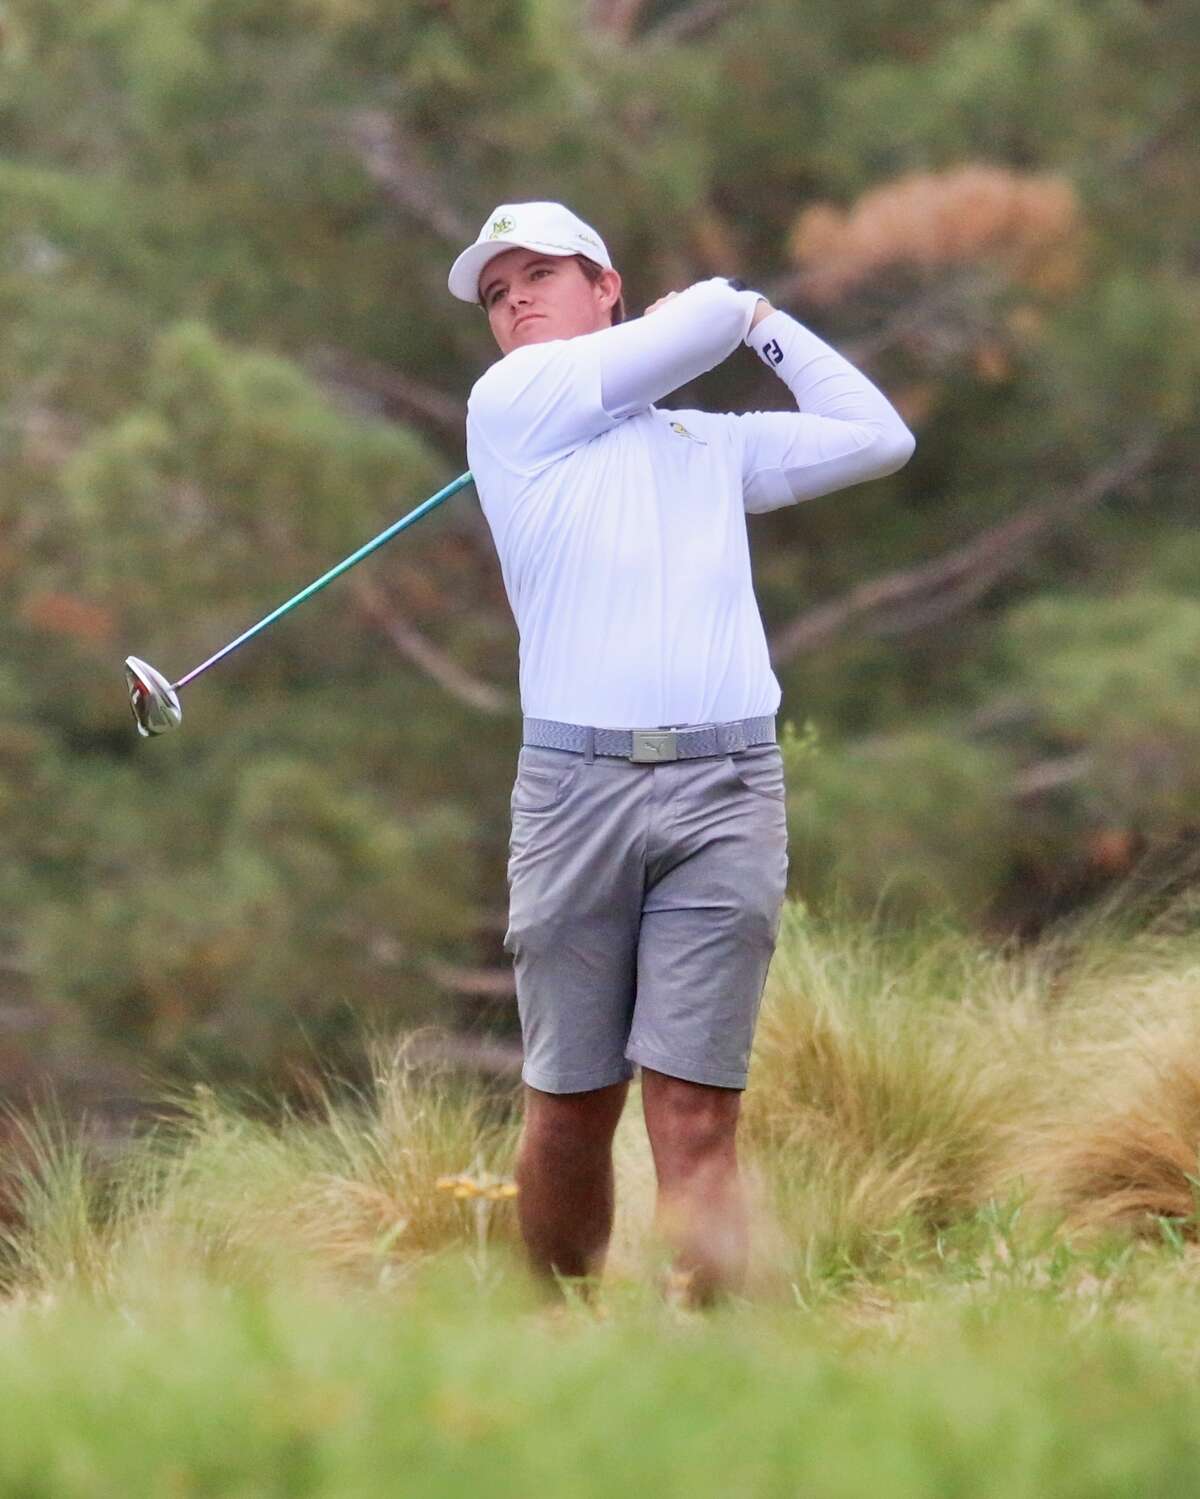 Midland College golfer Samual McKenzie is shown in action during the second round of the NJCAA National Tournament at The Rawls Course in Lubbock on Tuesday.